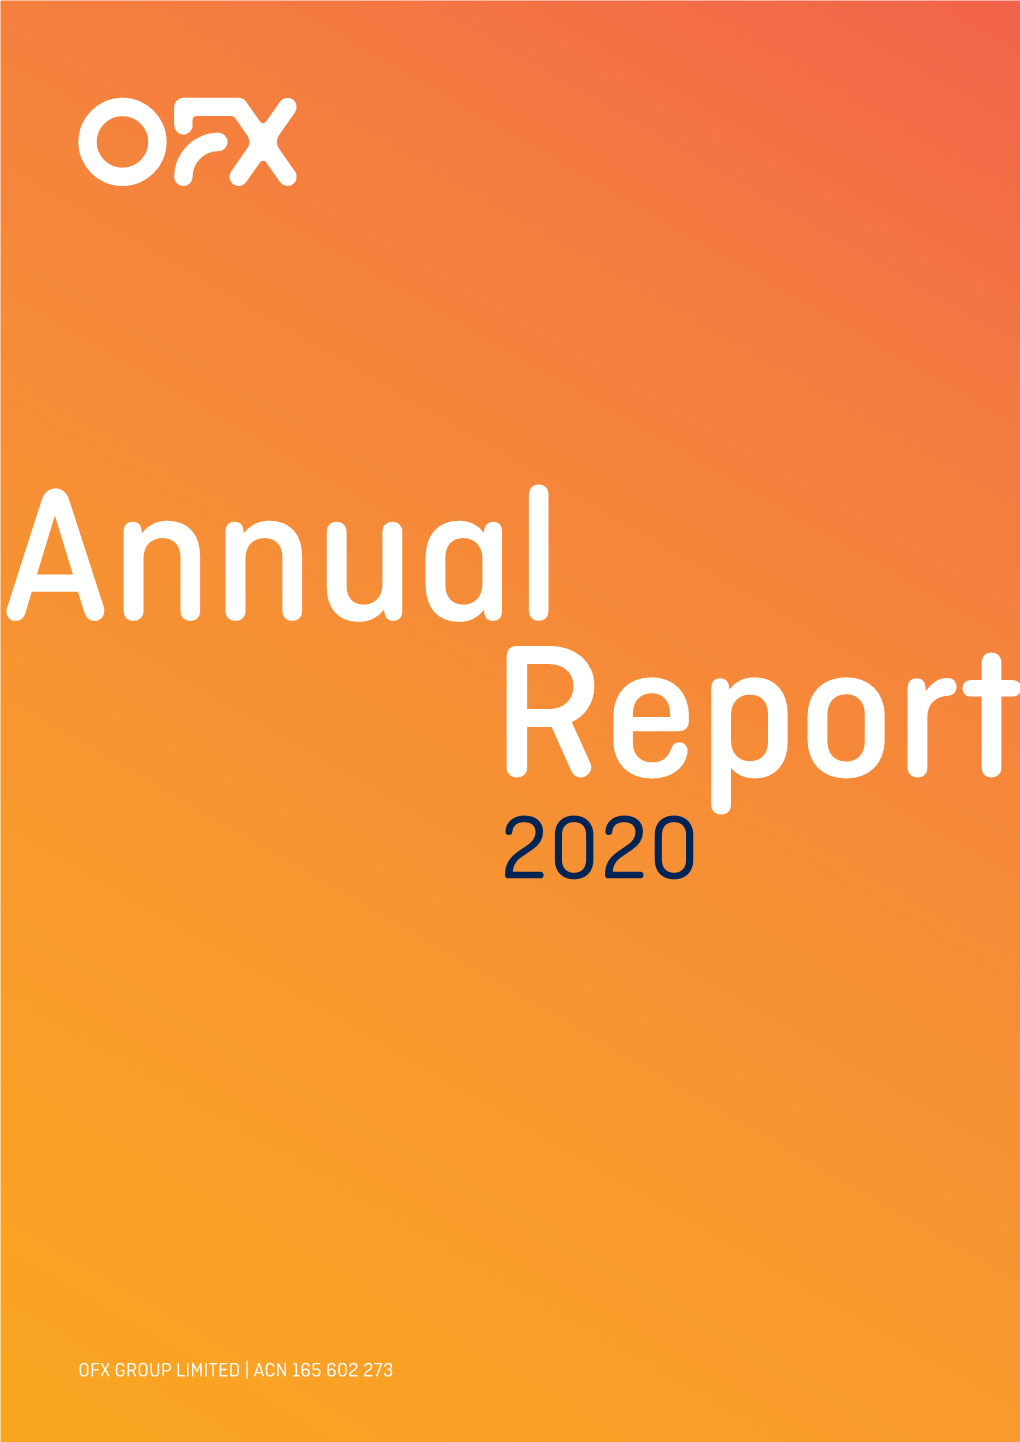 Ofx Group Limited | Acn 165 602 273 Annual Report 2020 | Ofx Group Limited